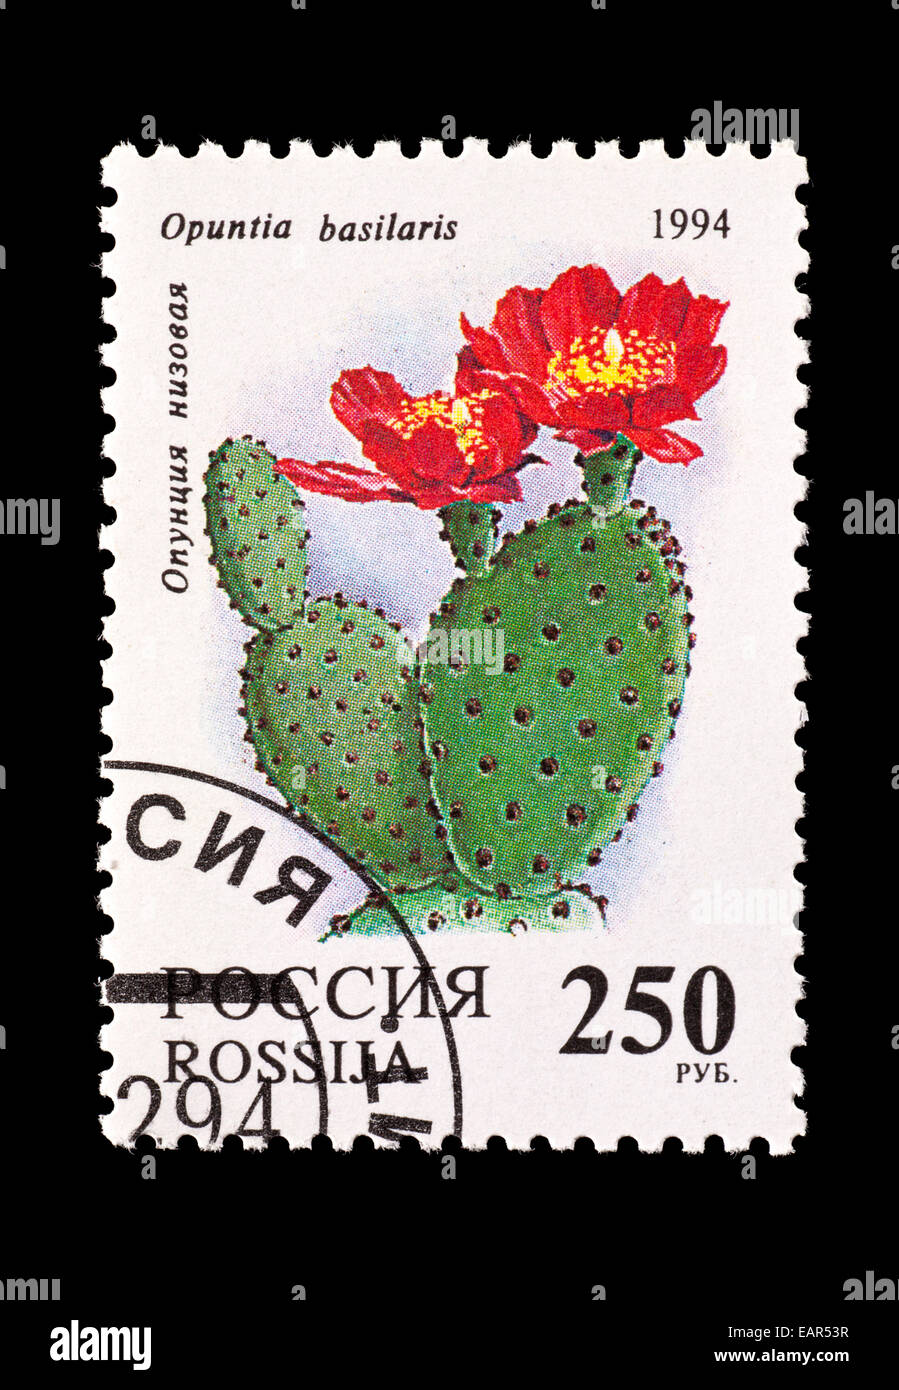 Postage stamp from Russia depicting a Beavertail Cactus flower (Opuntia basilaris) Stock Photo